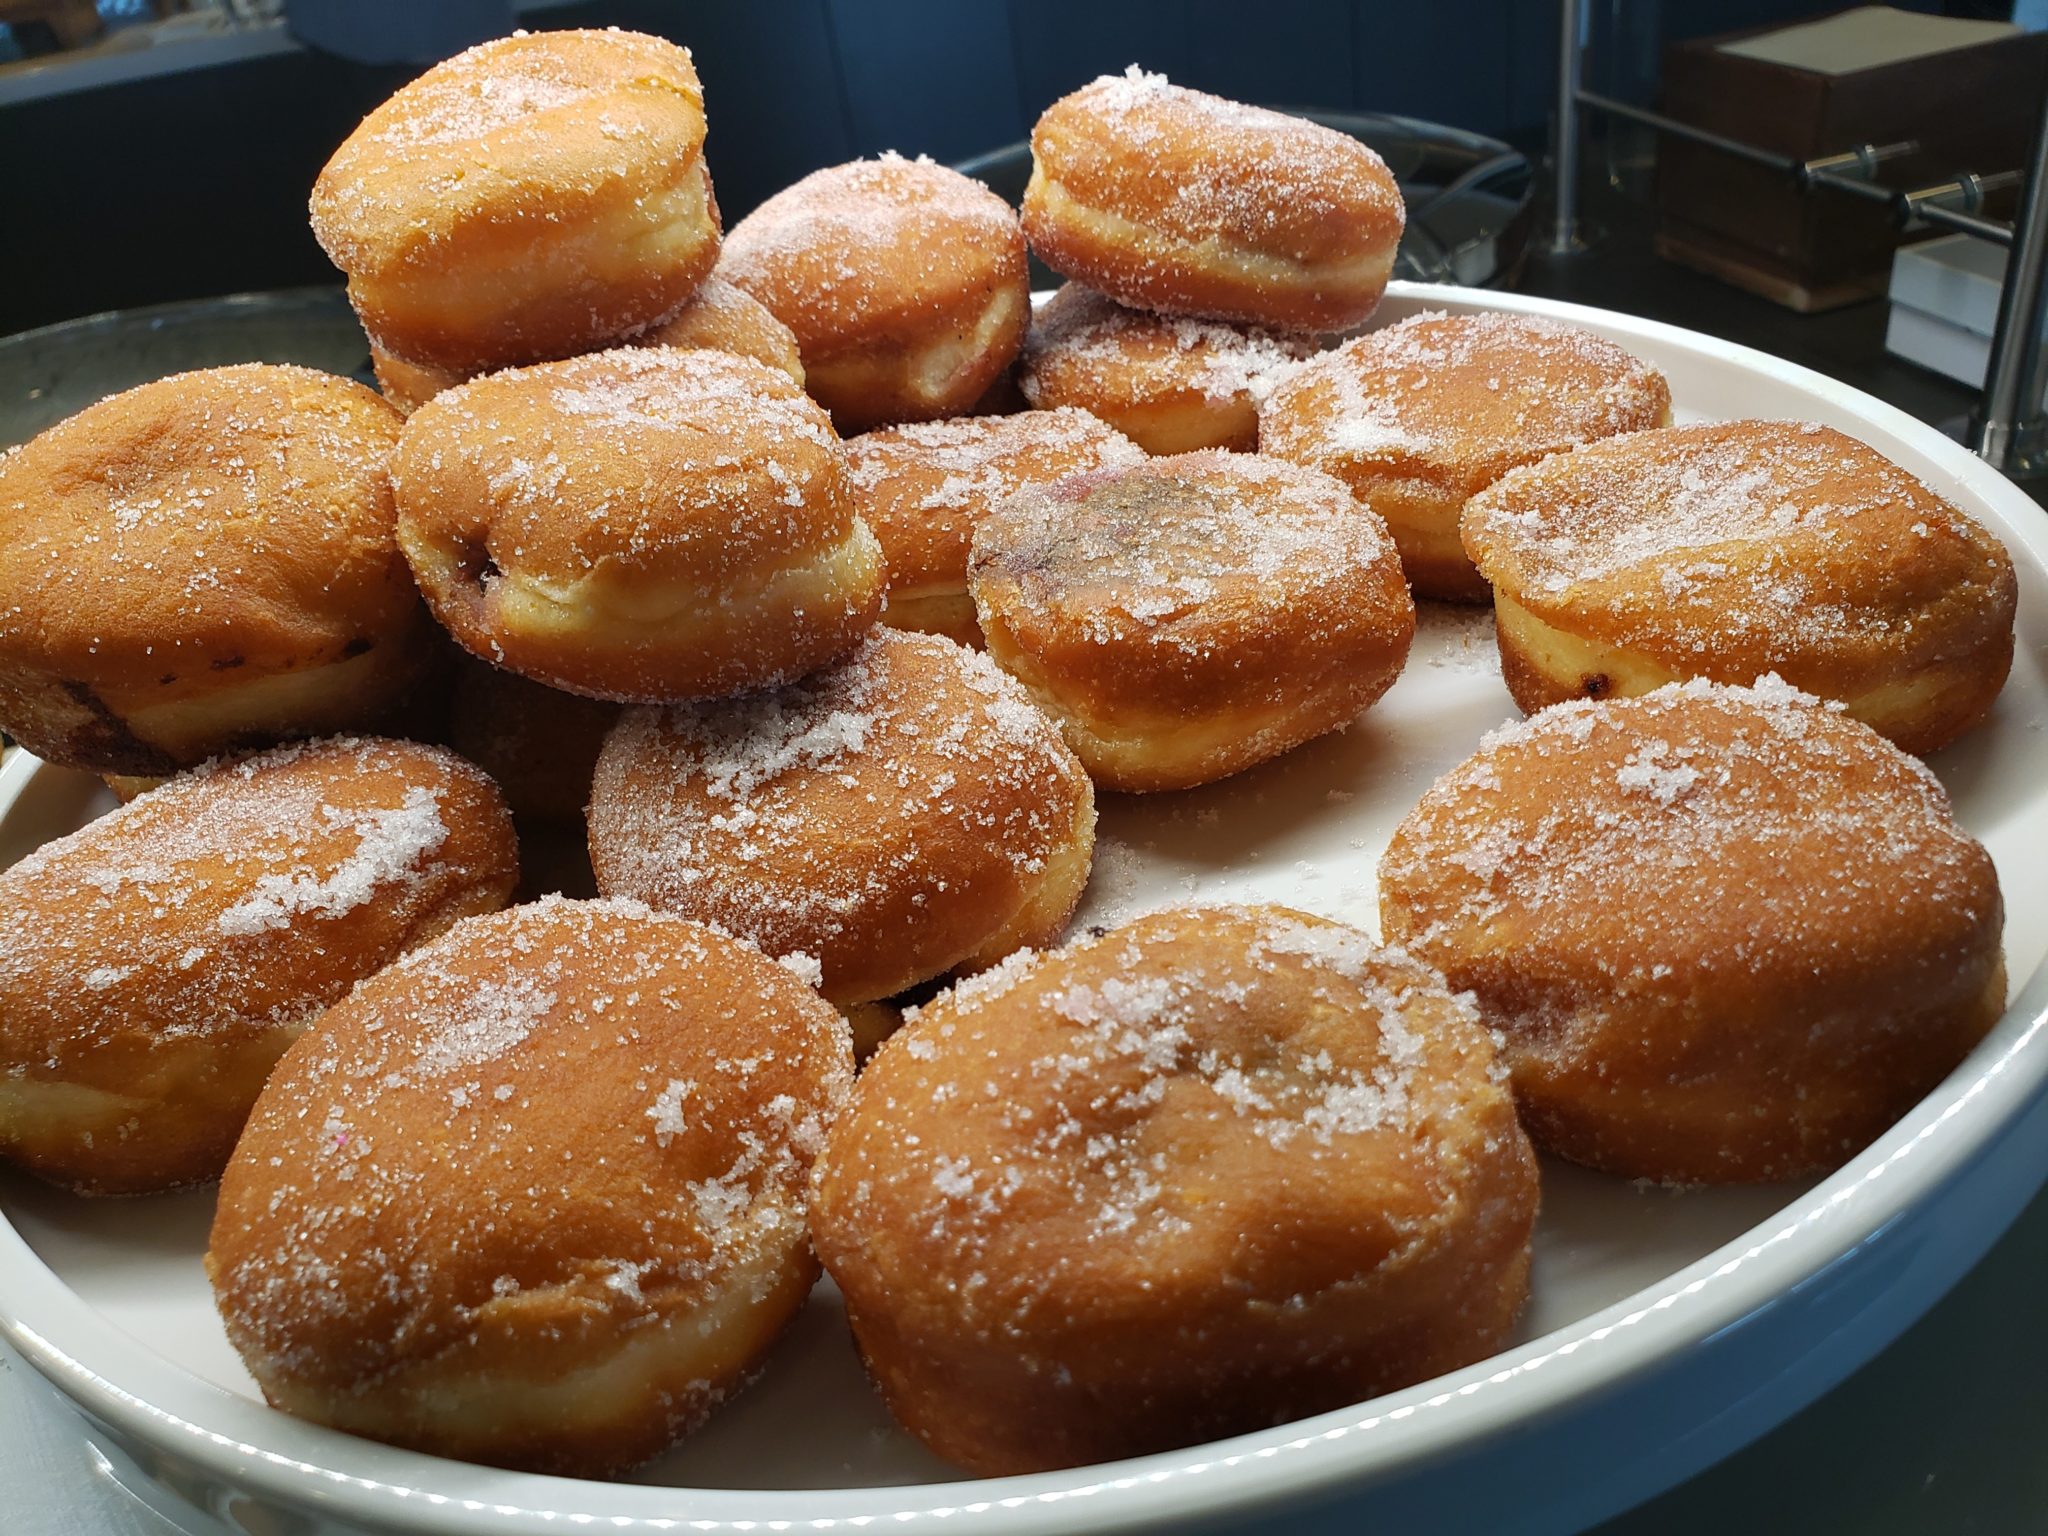 a plate of donuts with sugar on it